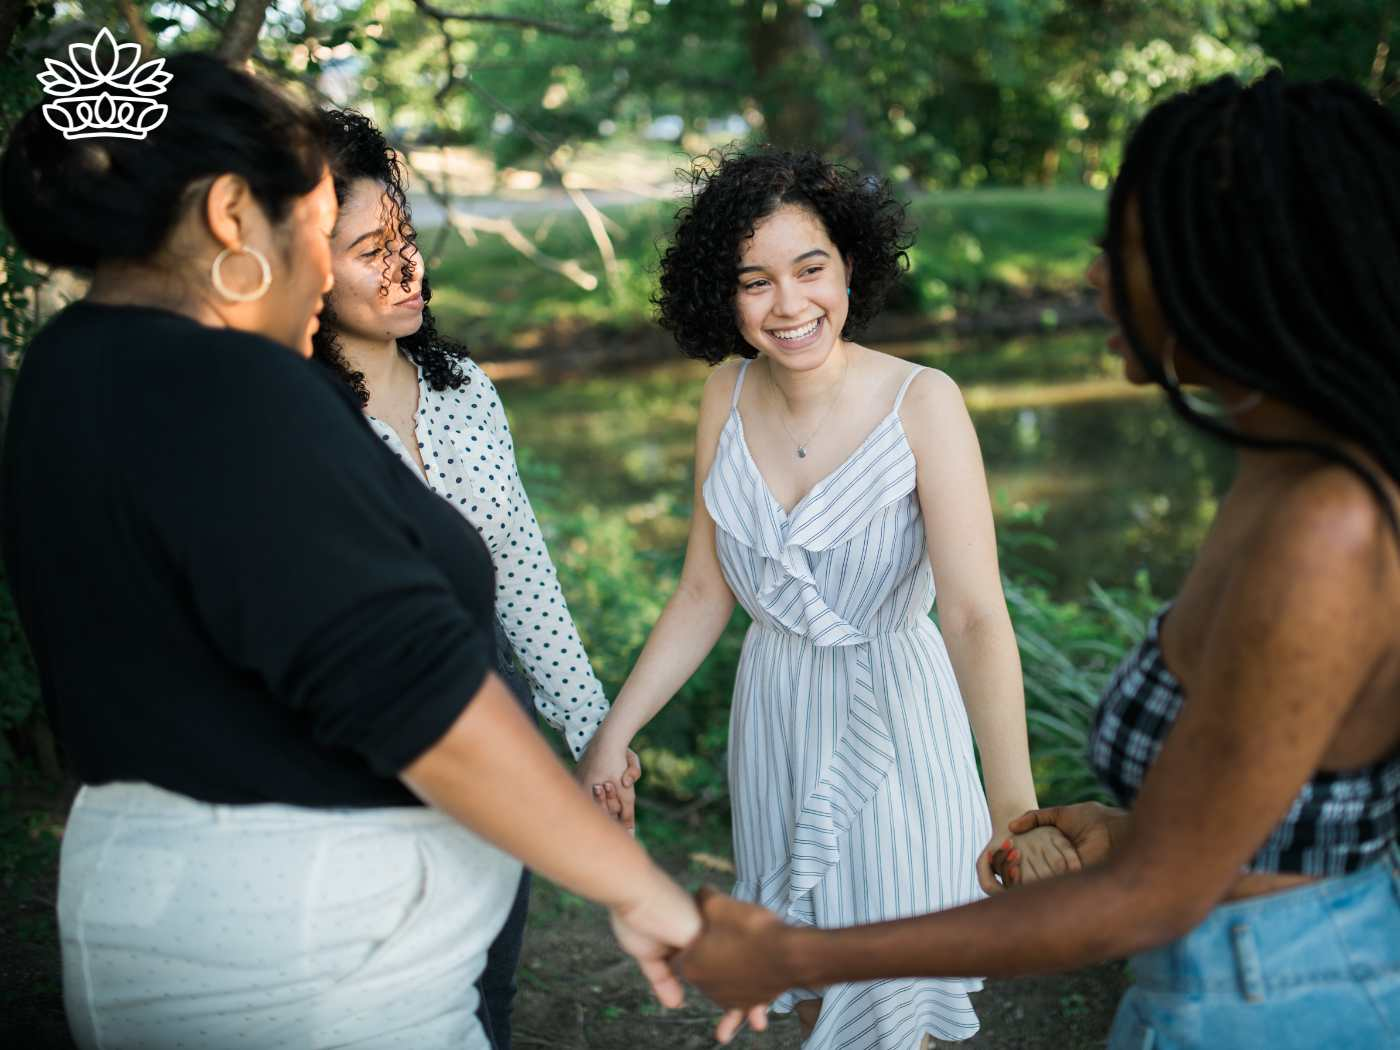 Four friends joyfully holding hands in a circle in a lush park setting, sharing a moment of happiness and connection. Perfect for celebrating their bond with gift sets that include makeup from the Gifts Boxes for Women Collection. Fabulous Flowers and Gifts.